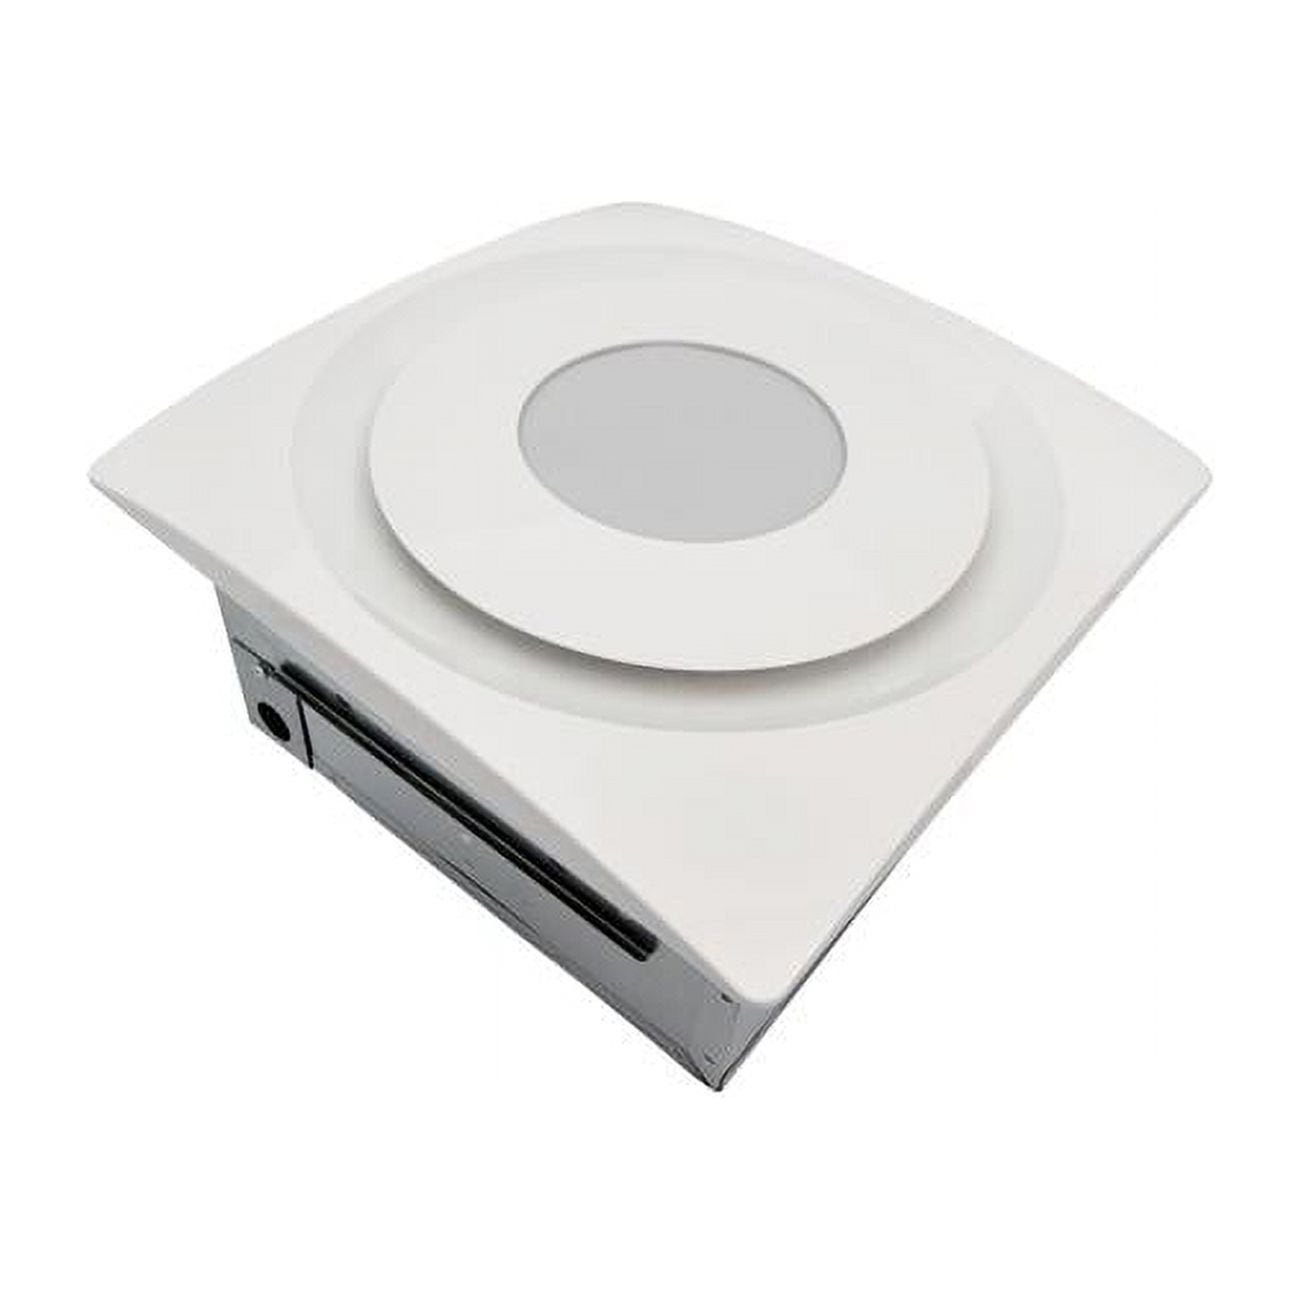 Picture of Aero Pure AP904H-SL W 90 CFM Quiet Bathroom Fan with LED Light & Humidity Sensor - White